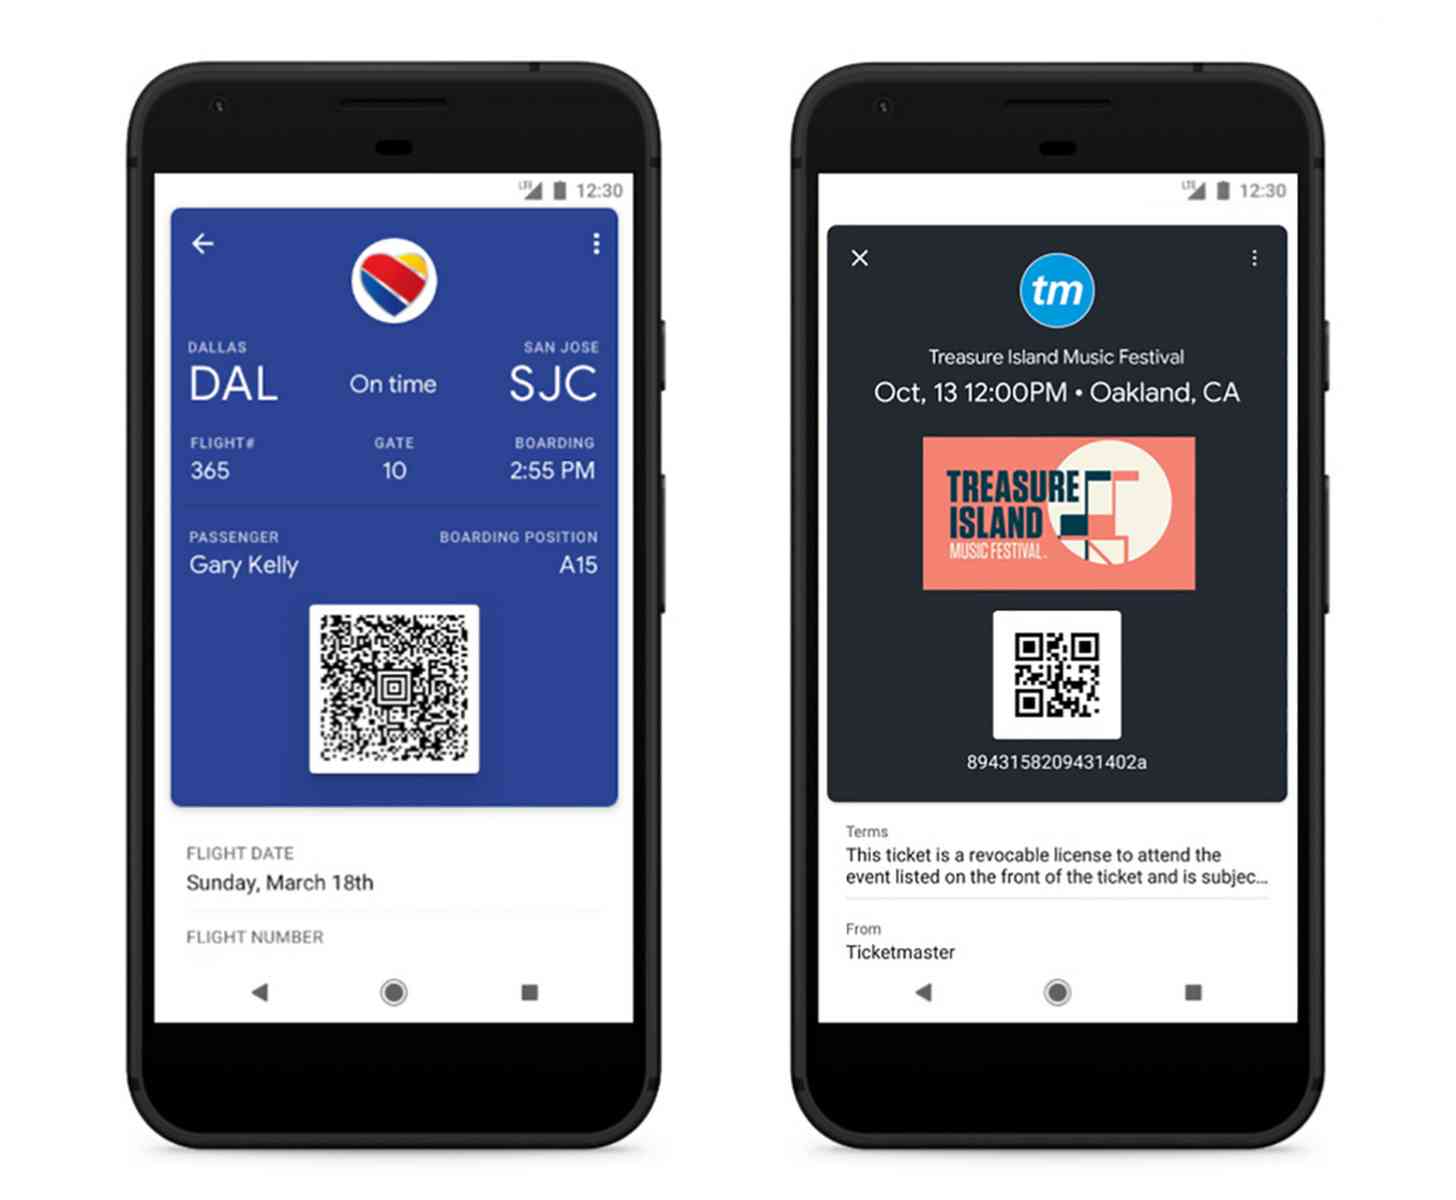 Google Pay event tickets, boarding passes